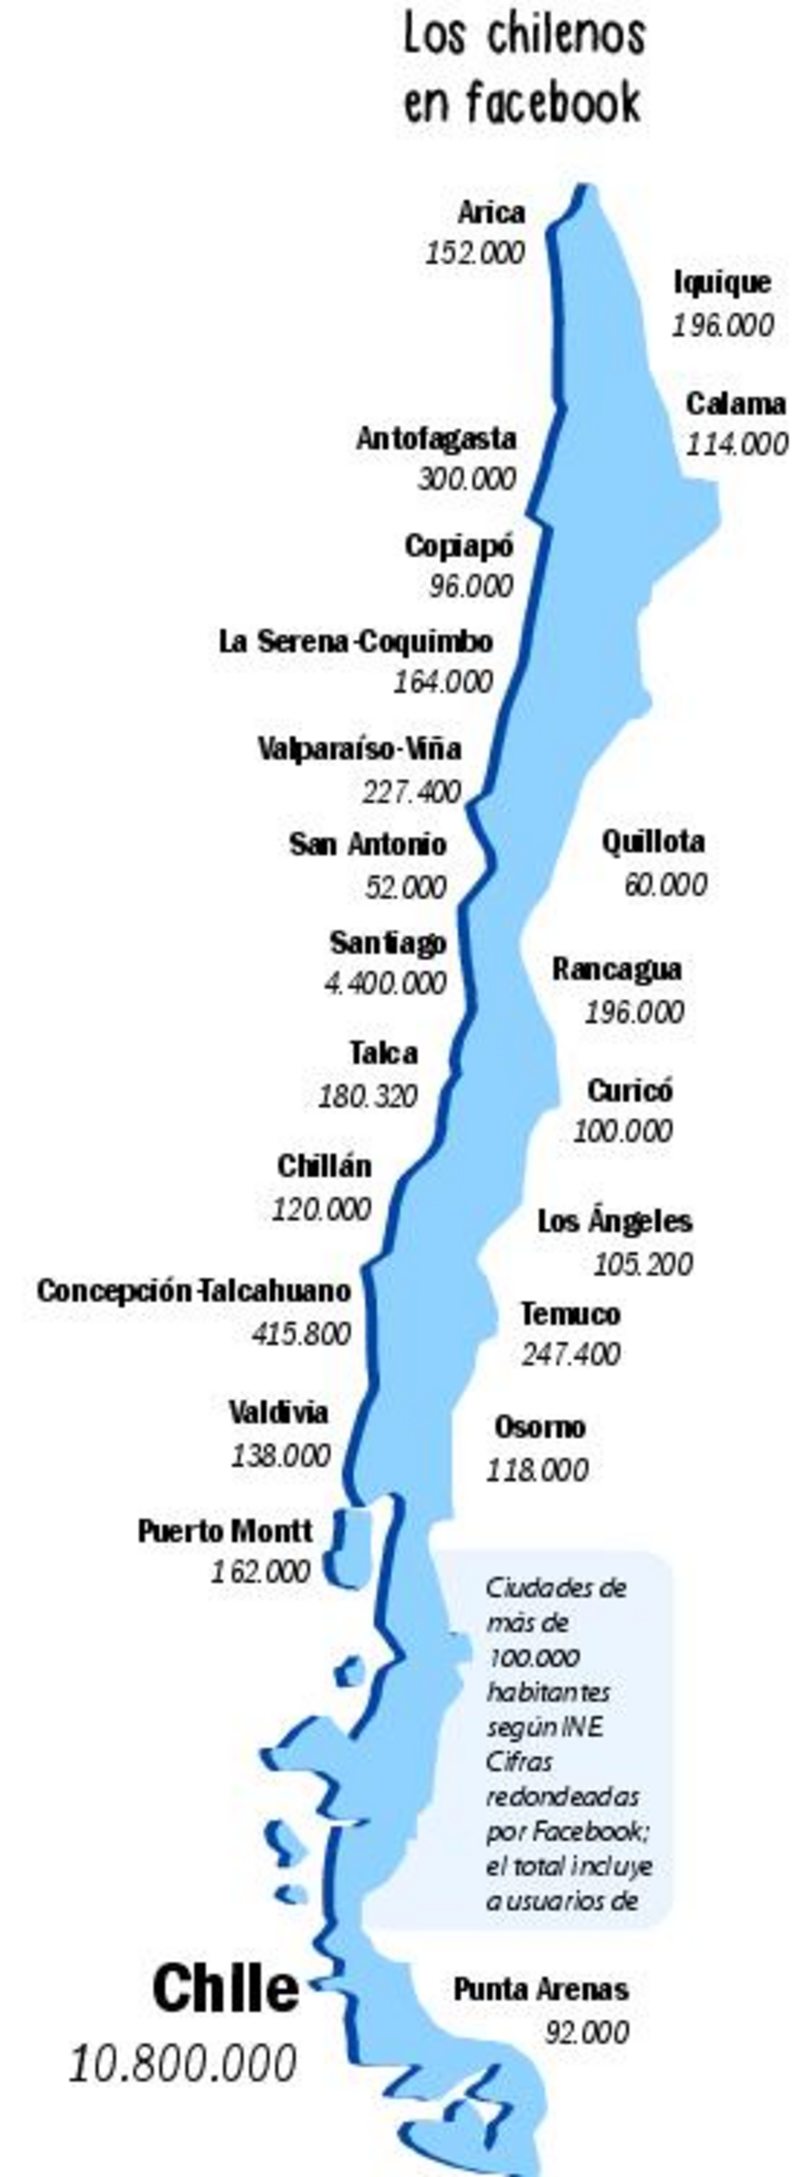 map of facebook users in chile